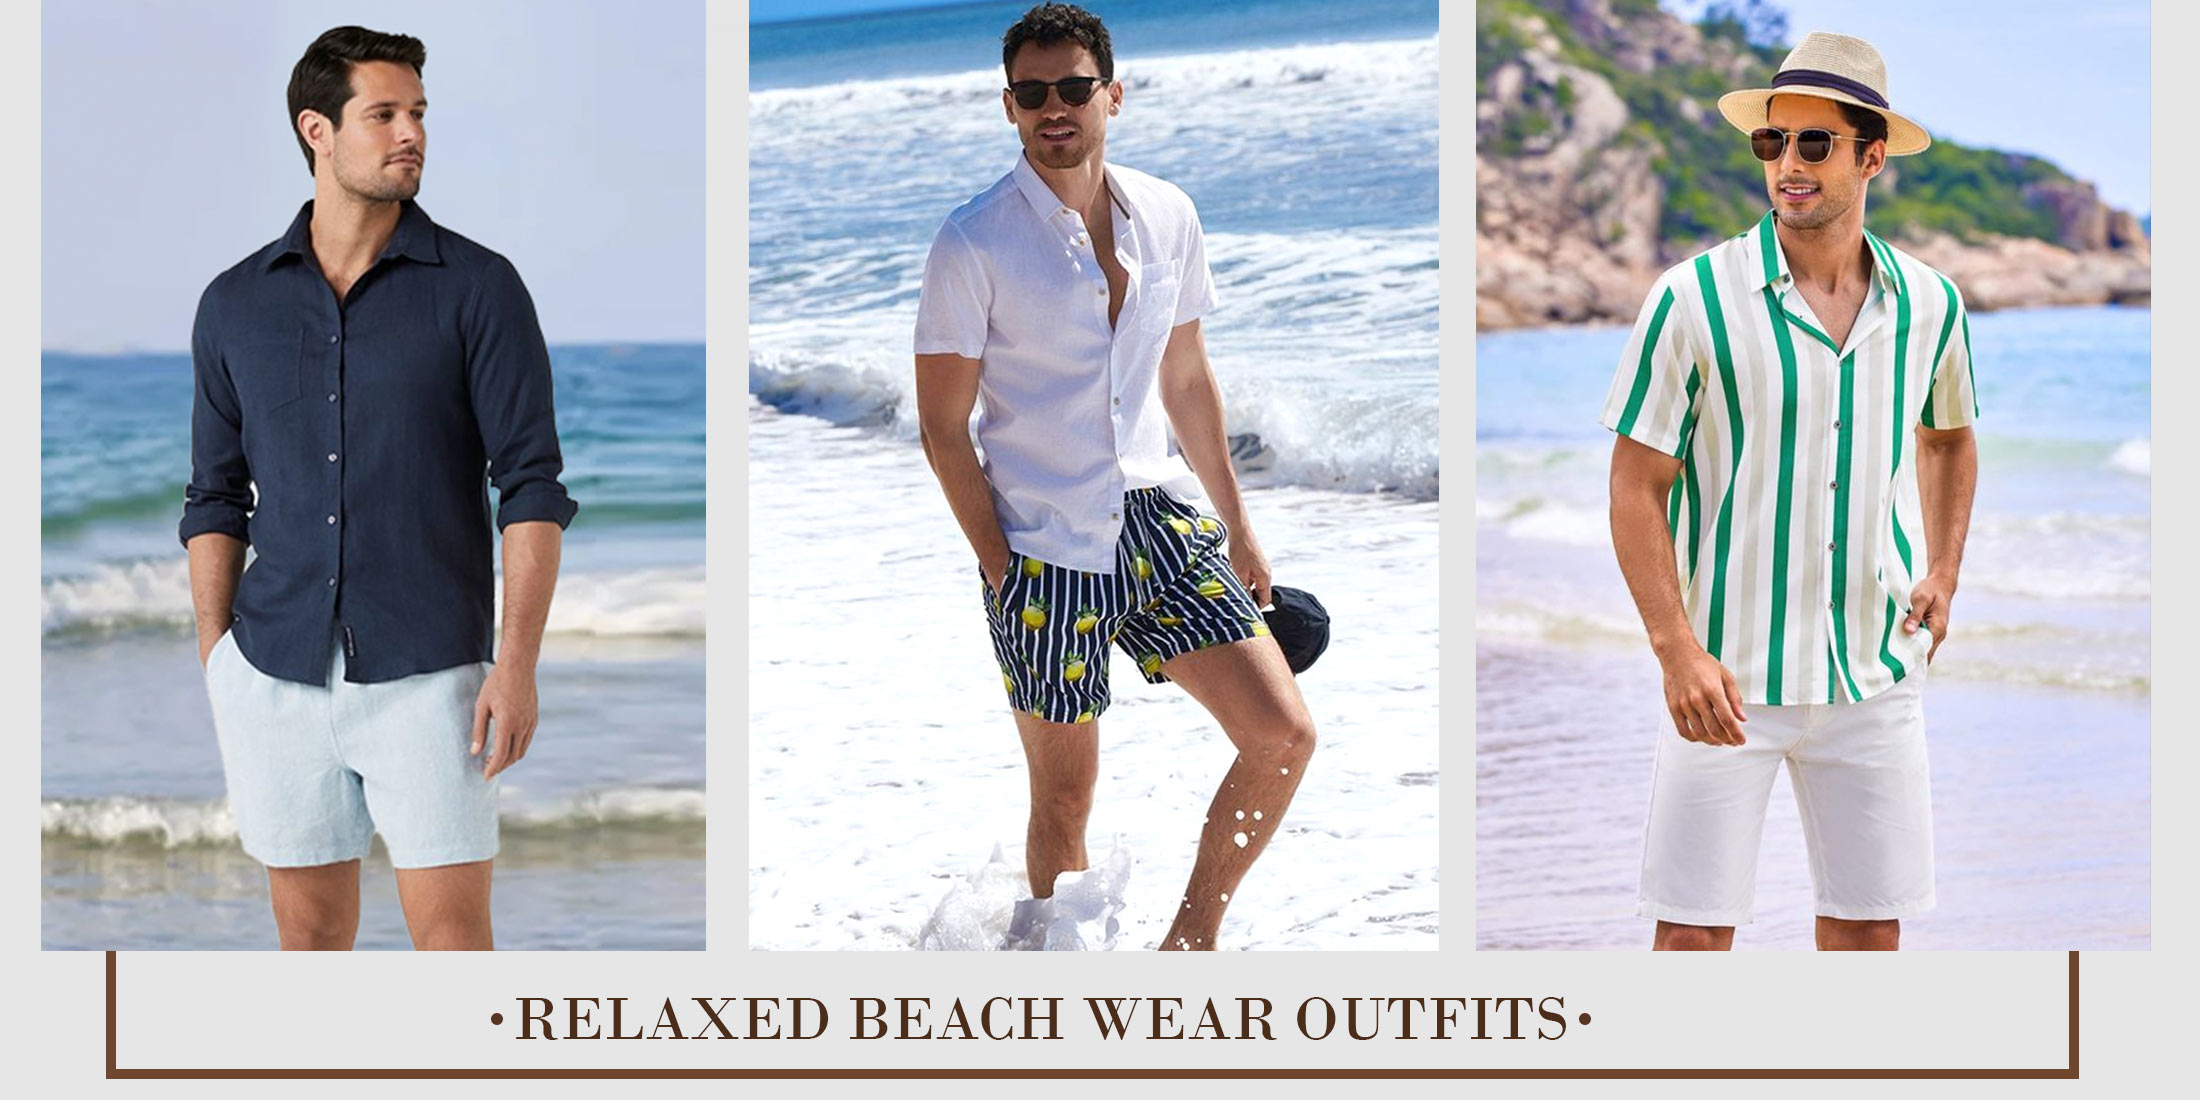 Beach Wear Outfits for Men